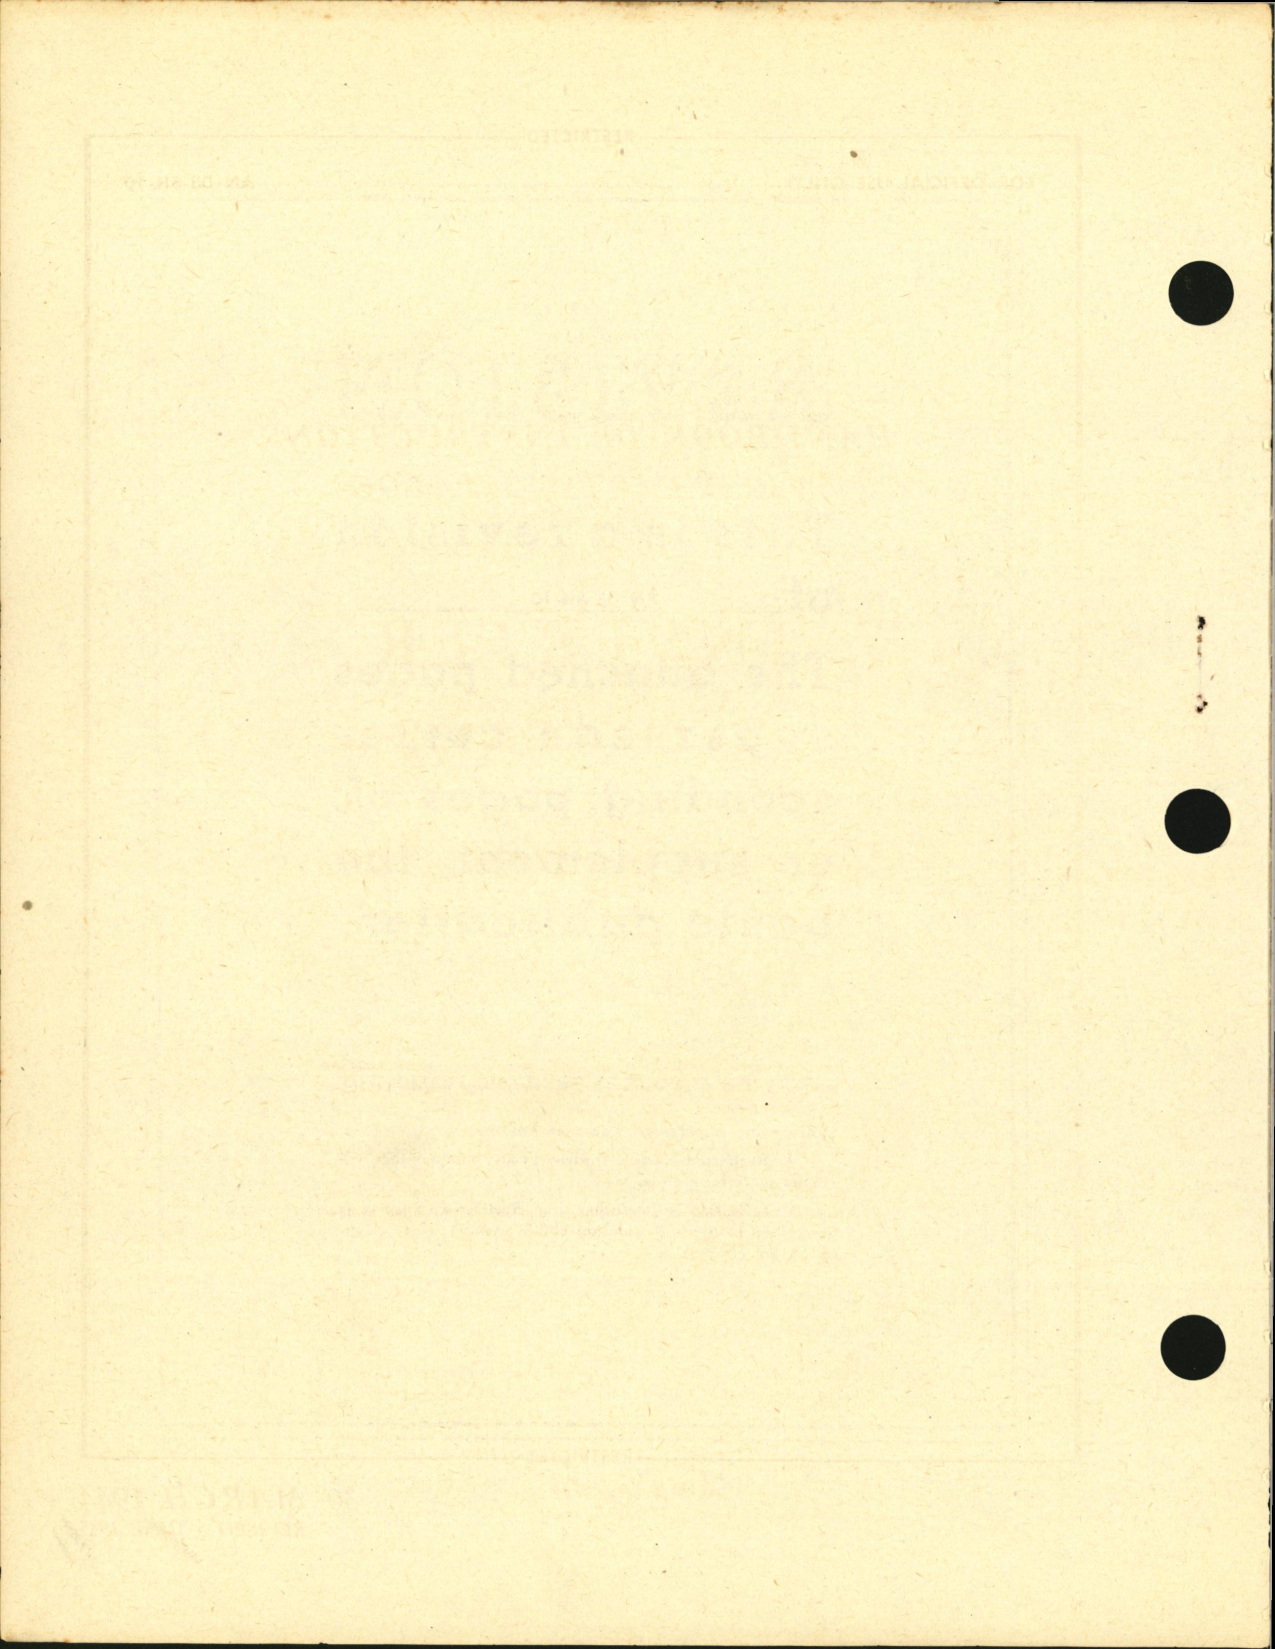 Sample page 8 from AirCorps Library document: Operation, Service & Overhaul Instructions with Parts Catalog for Inverter Type MG-153F (R88-I-4220)